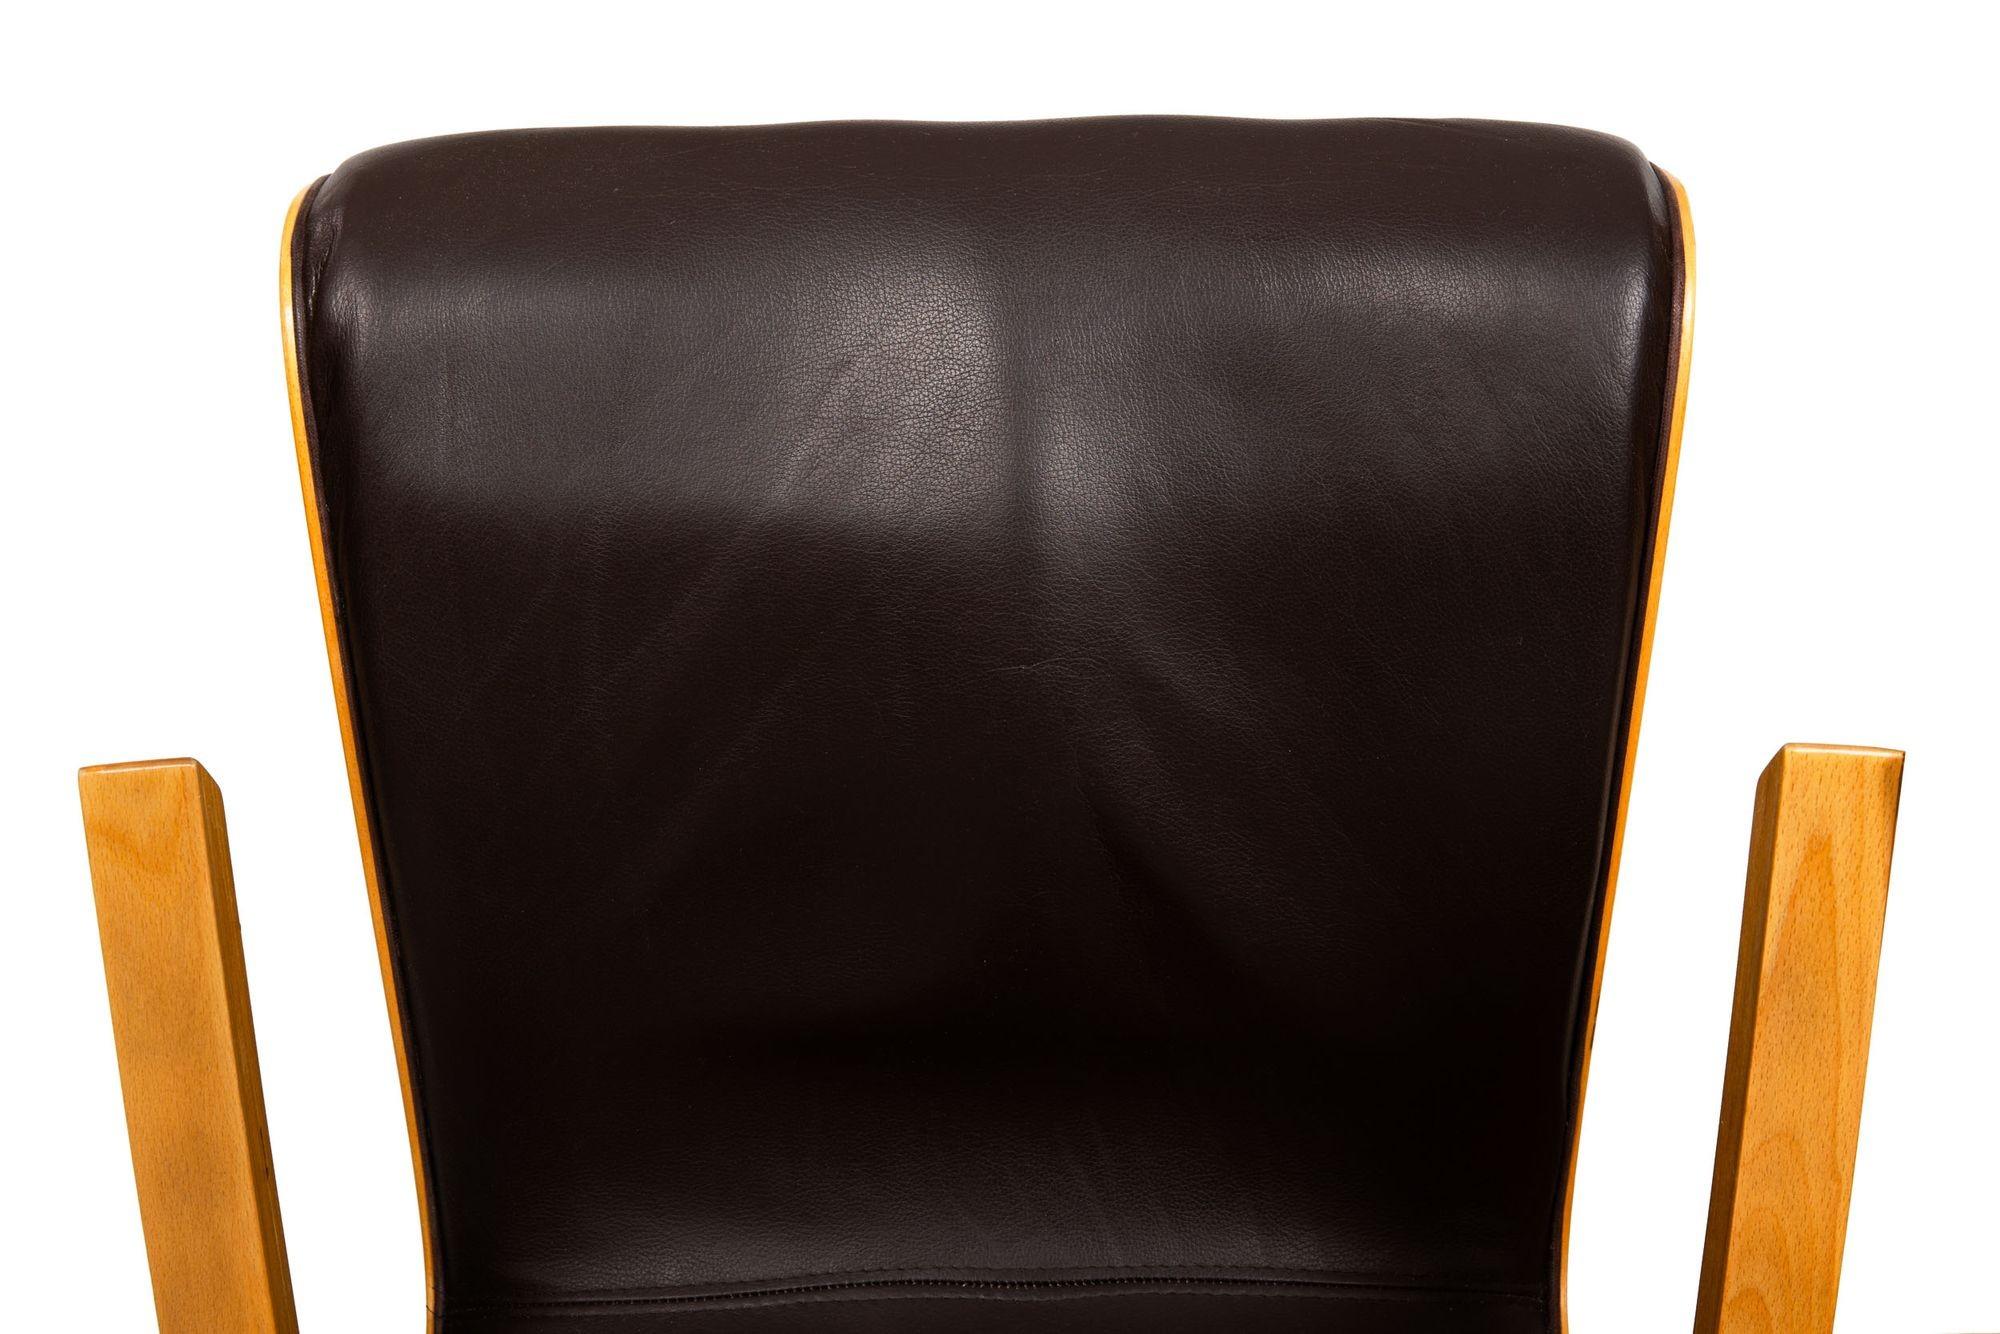 Scandinavian Modern Bentwood Leather Arm Chairs with Ottomans - A Pair For Sale 7